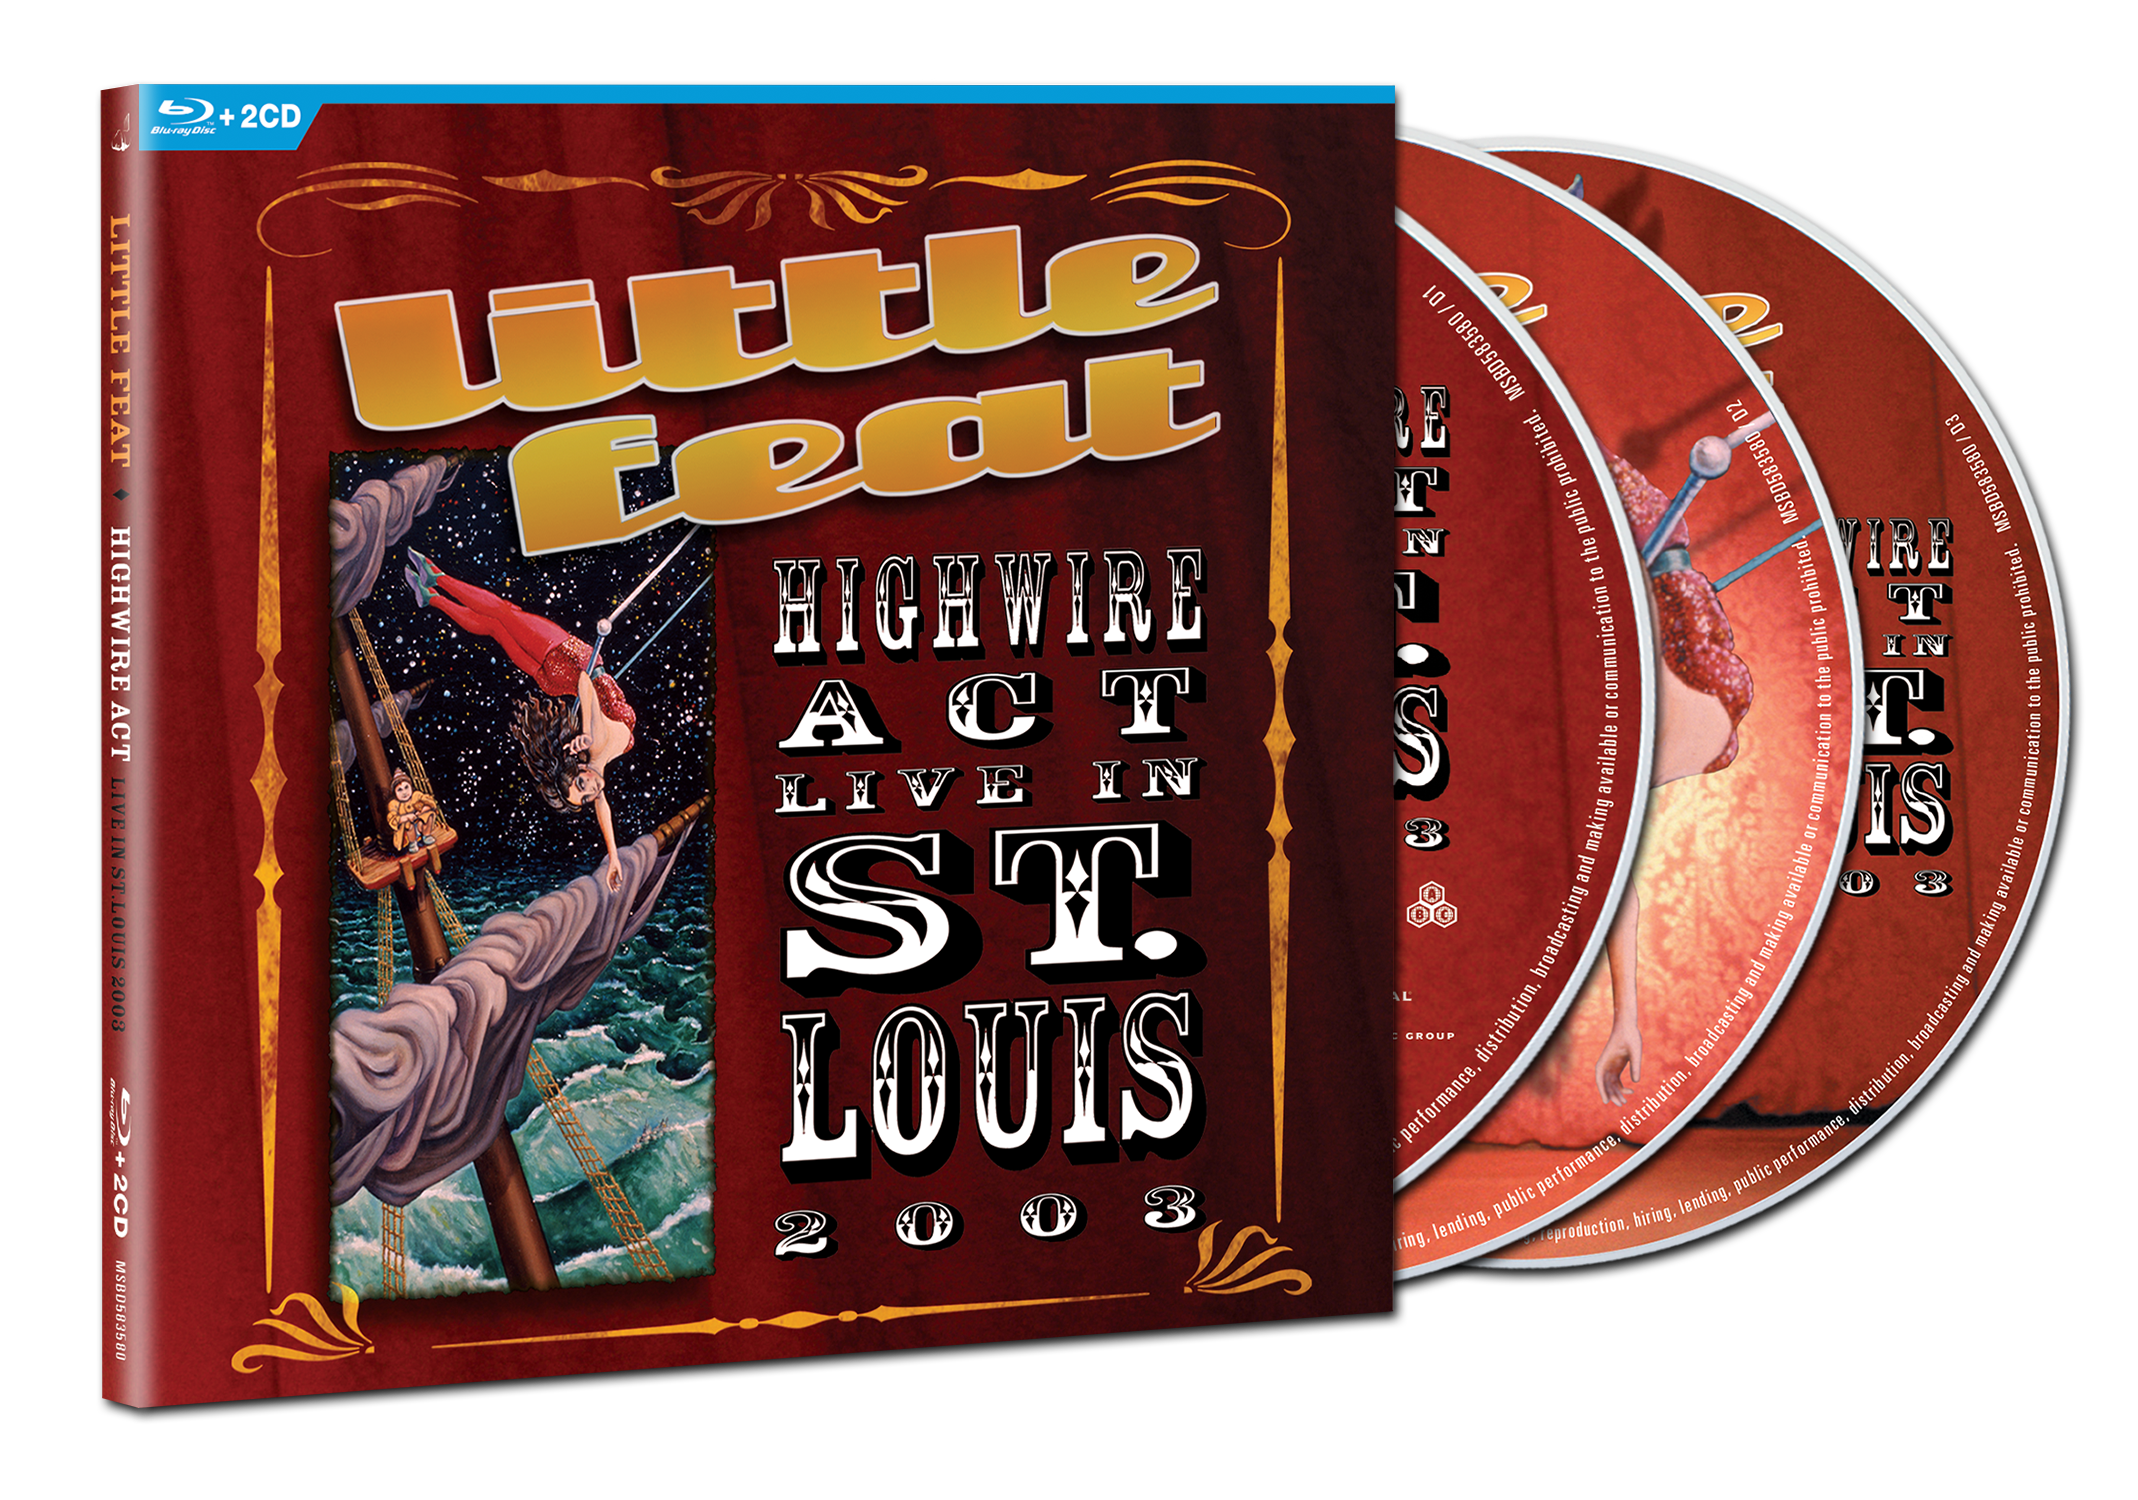 Little Feat - Highwire Act - Live In St. Louis 2003: BD + 2CD